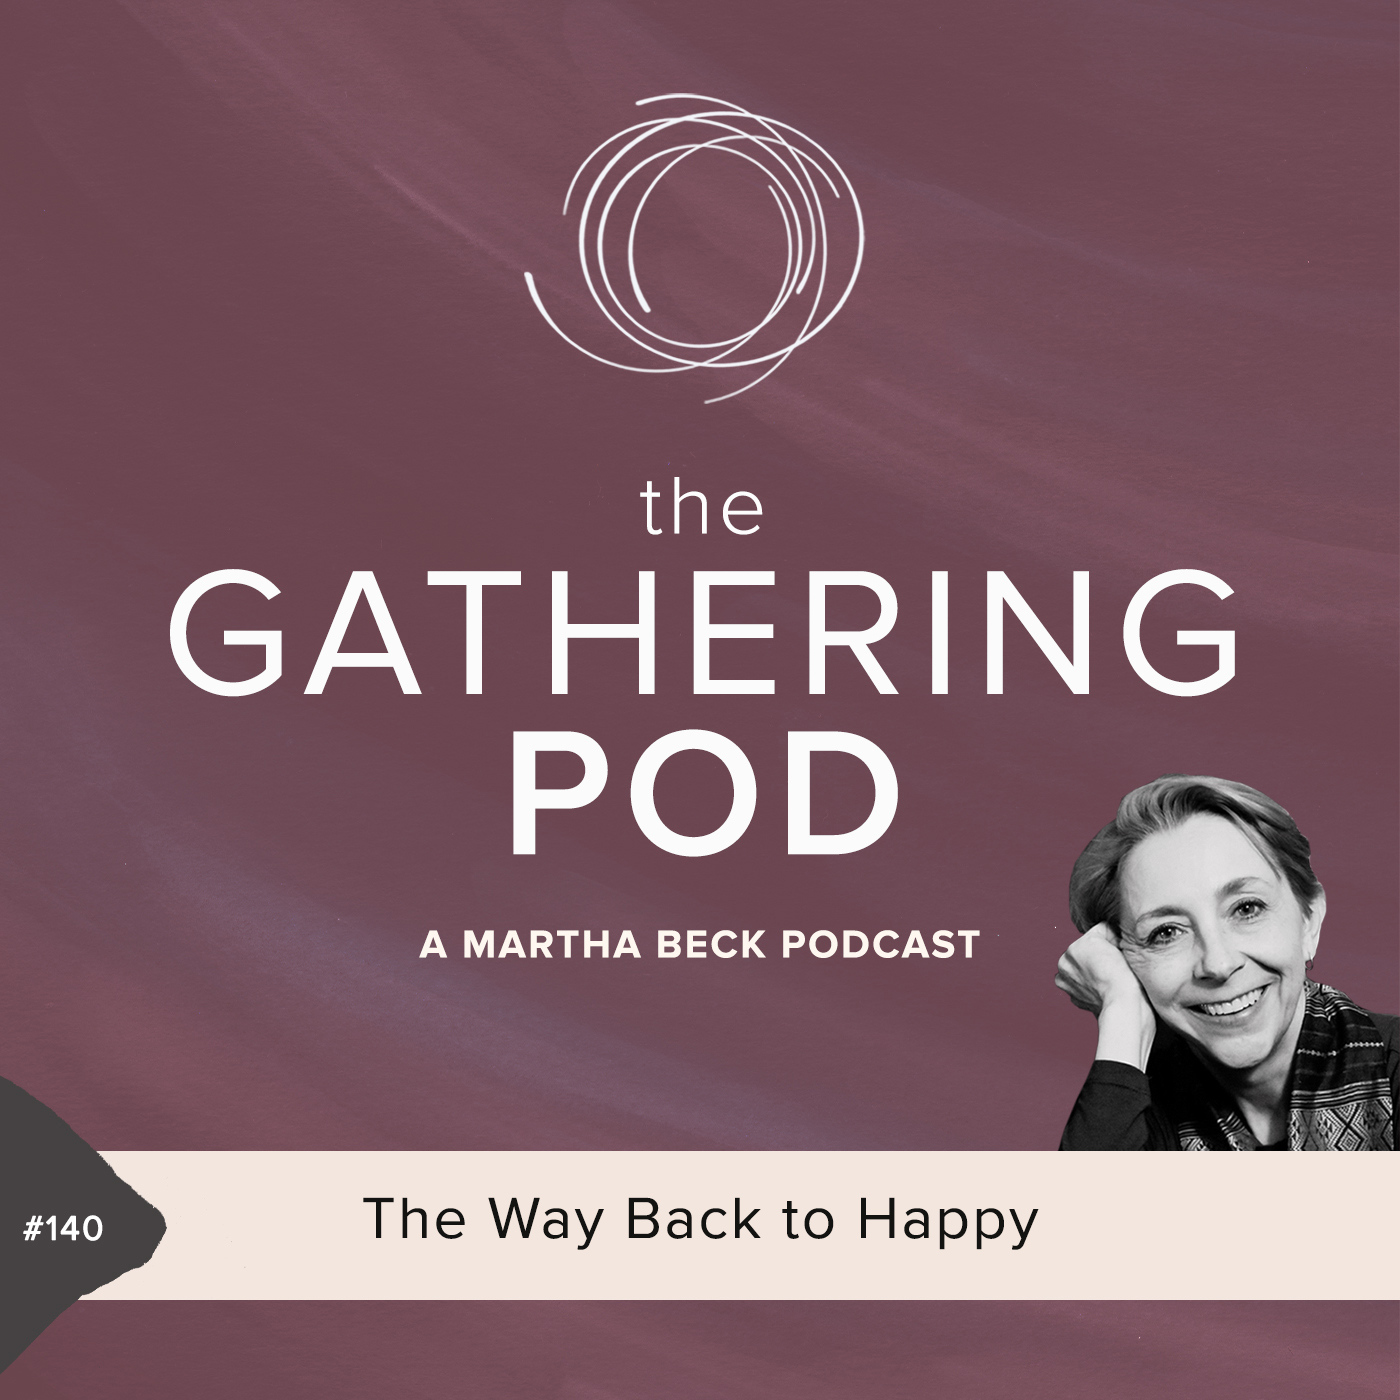 Image for The Gathering Pod A Martha Beck Podcast Episode #140 The Way Back to Happy